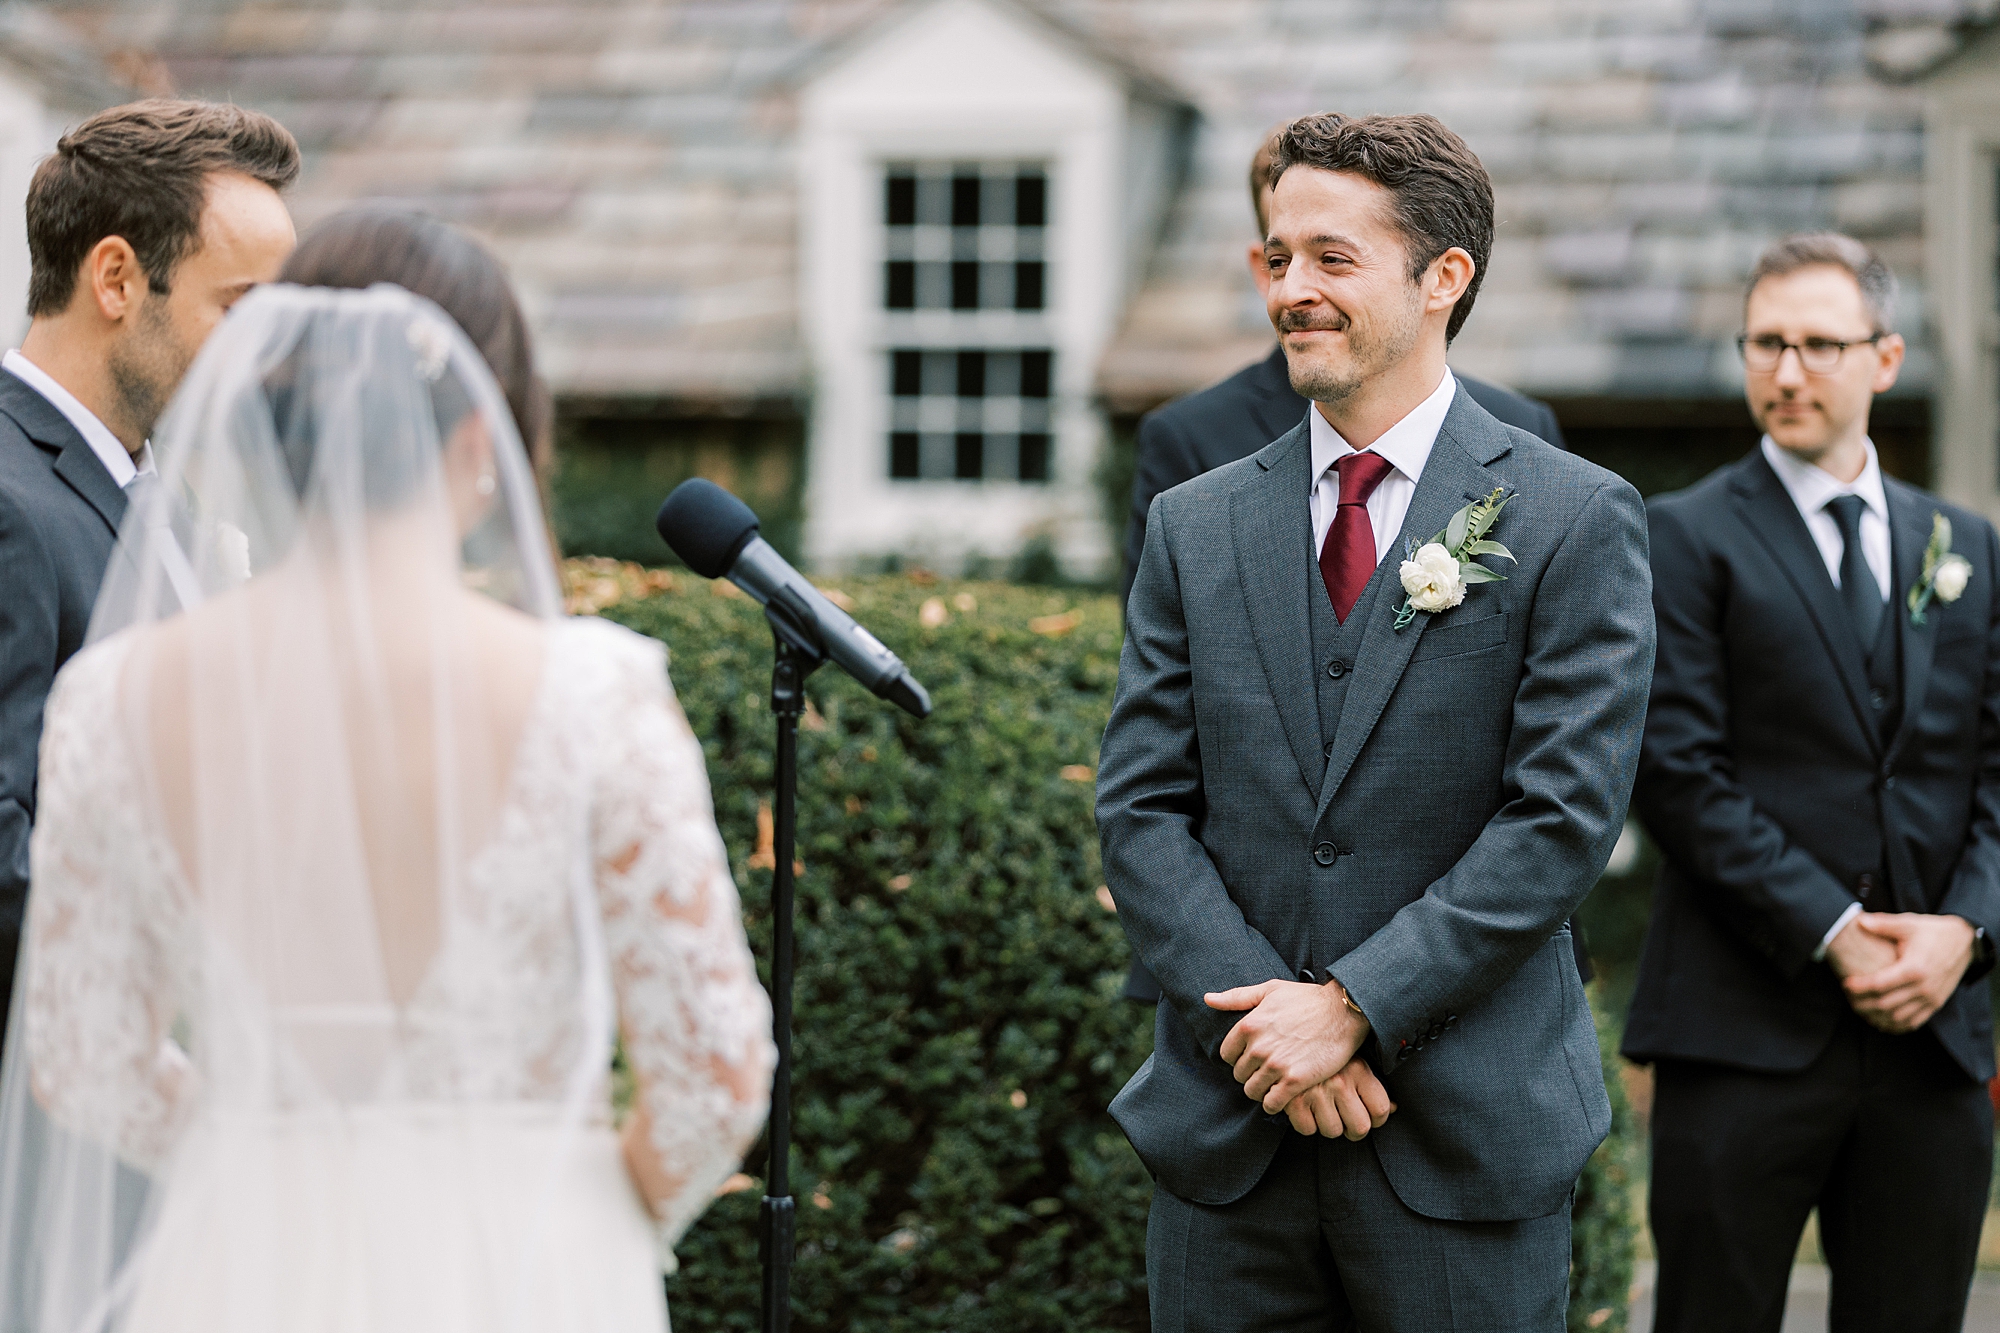 groom smiles at bride during wedding ceremony on lawn